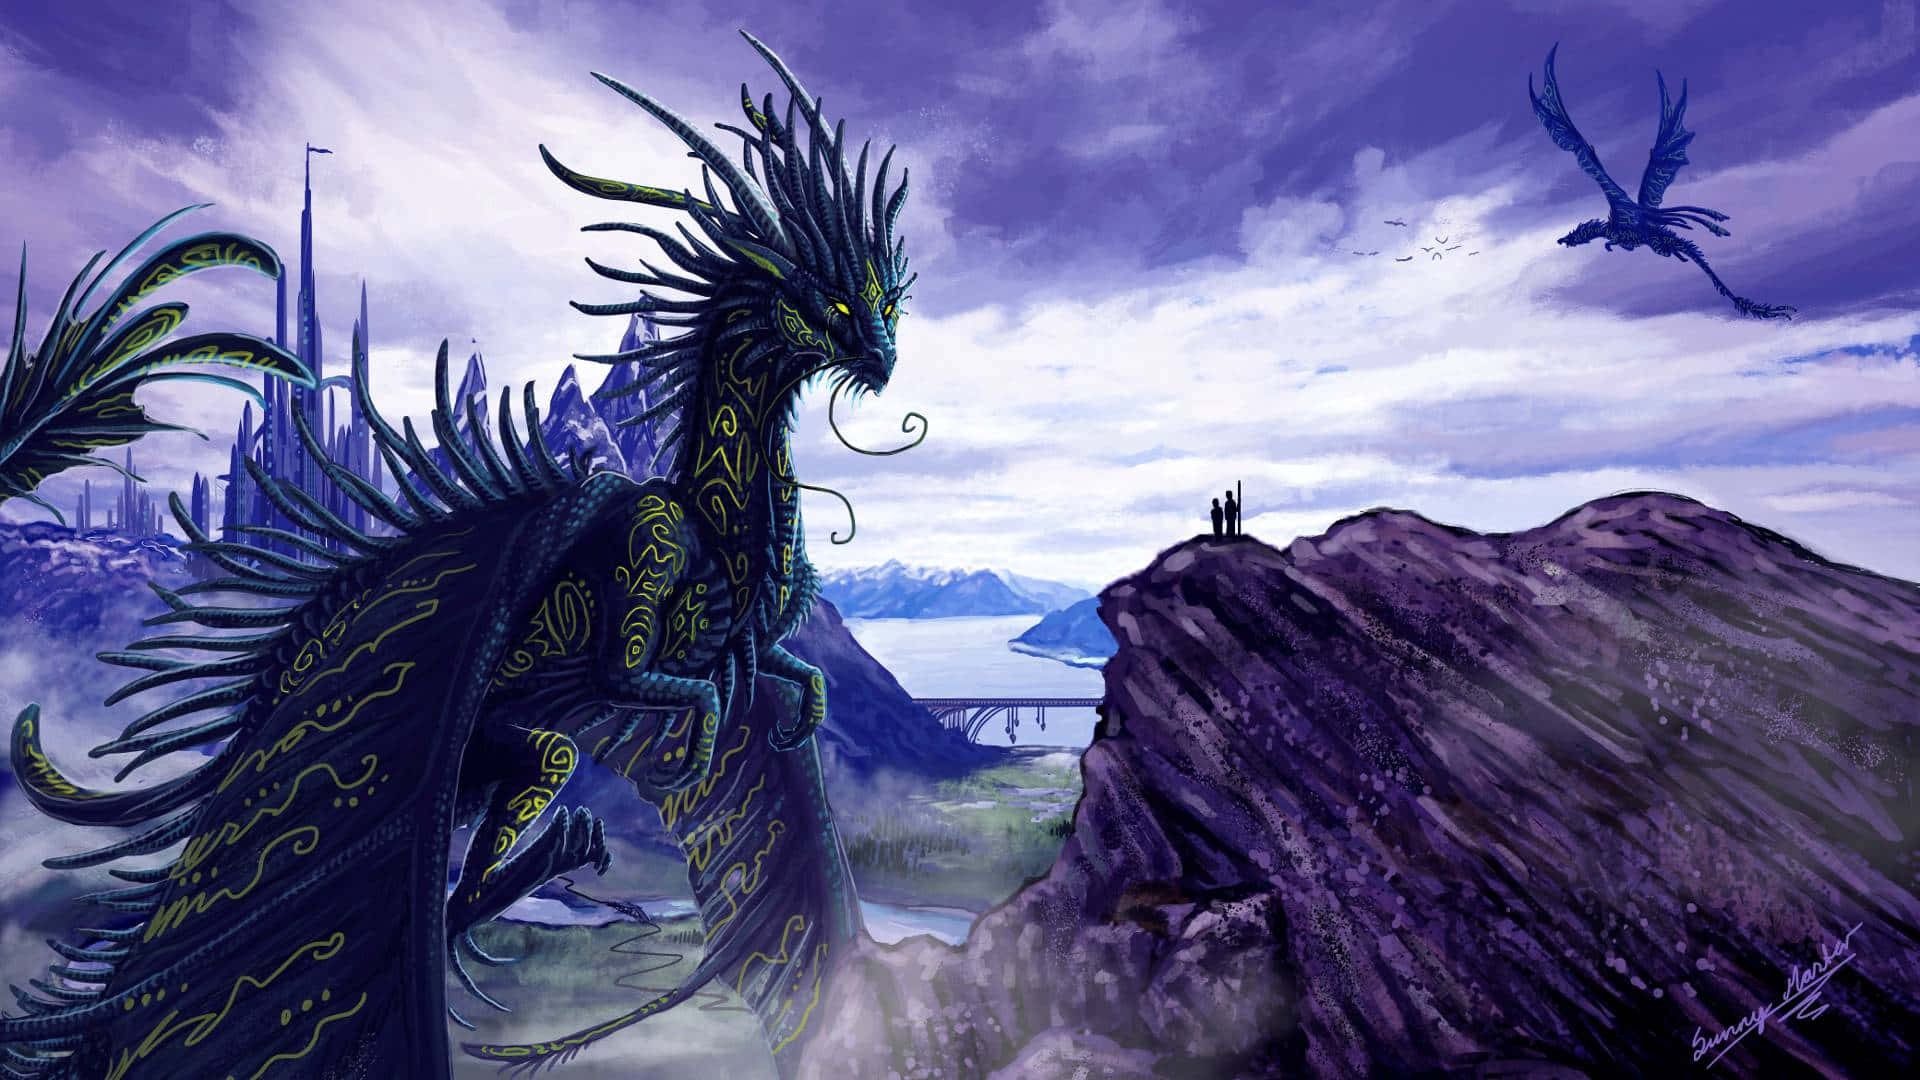 "The Alluring Beauty of a Purple Dragon" Wallpaper